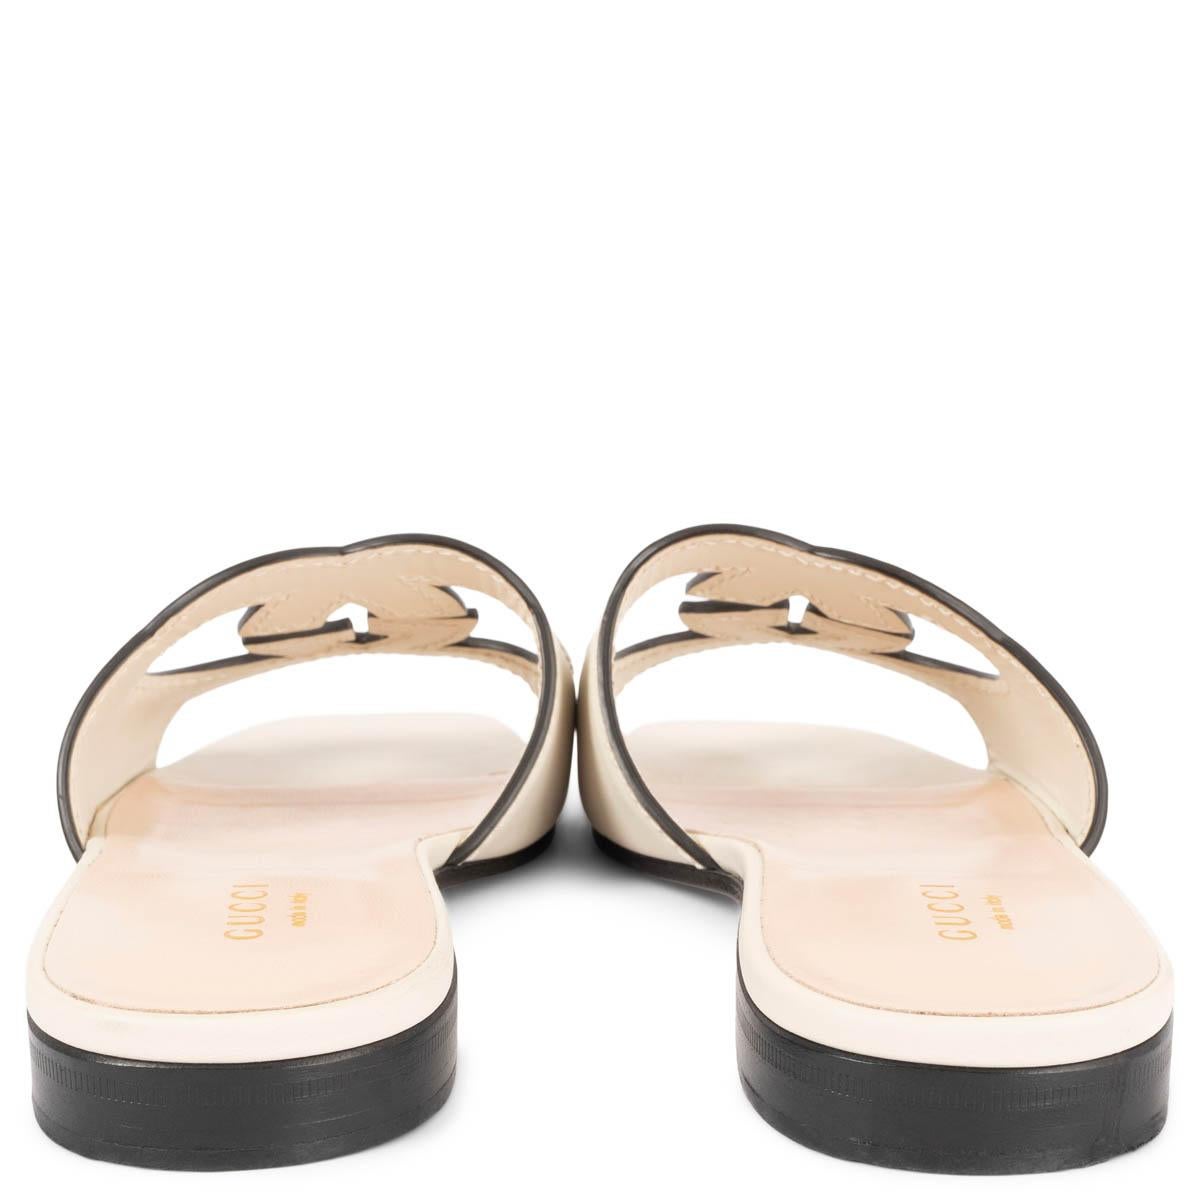 GUCCI cream leather INTERLOCKING G CUT-OUT SLIDE Sandals Shoes 35 In Excellent Condition For Sale In Zürich, CH